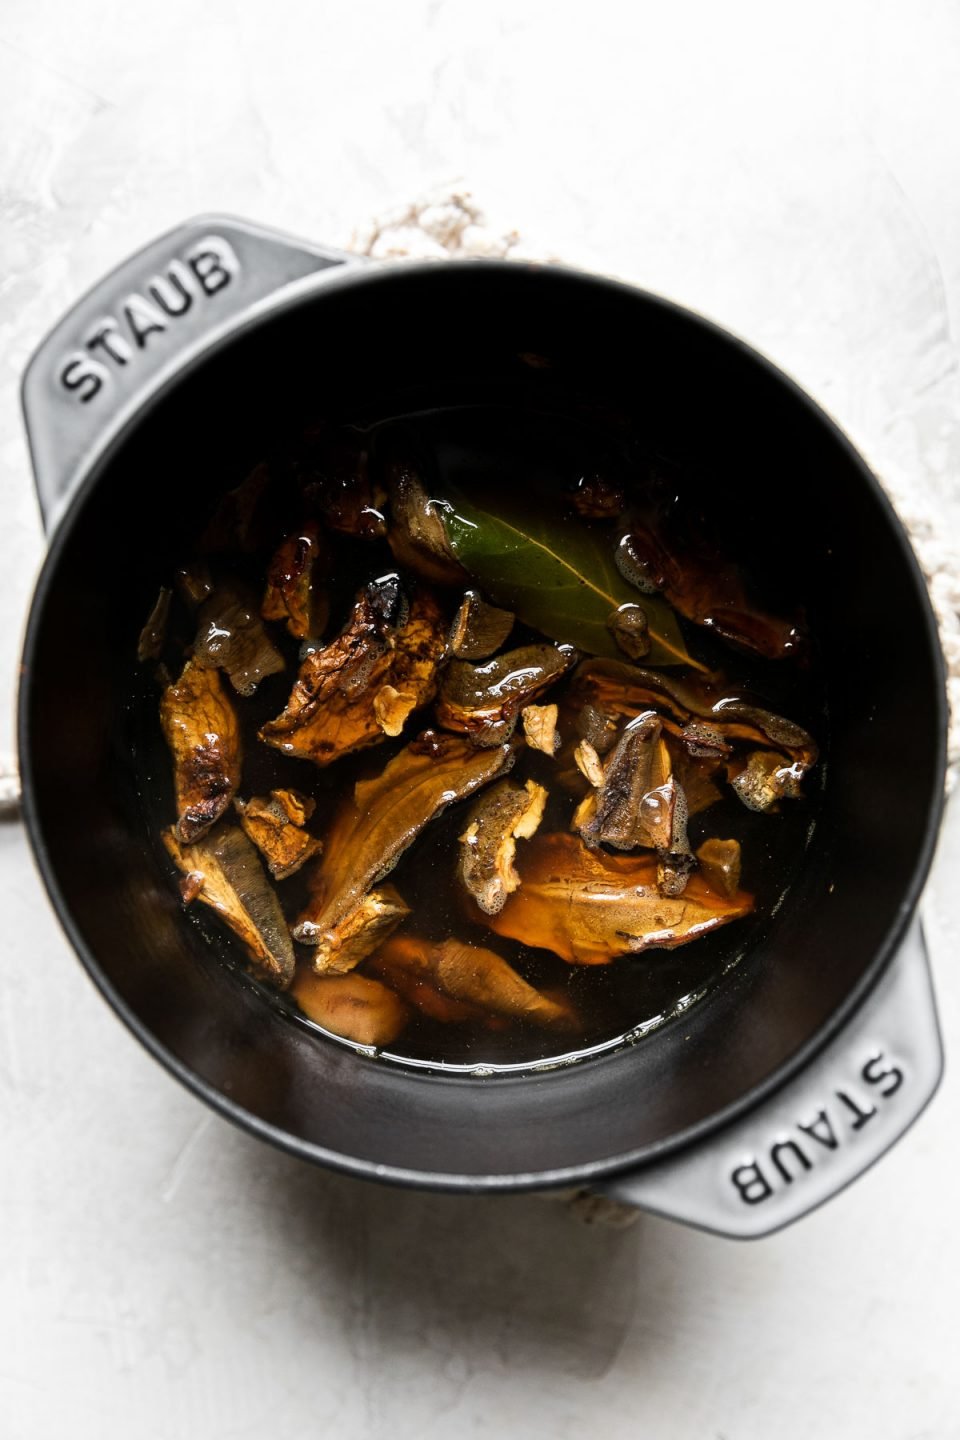 Dried porcini mushrooms reconstitute in vegetable broth with a bay leaf in a Staub Cast Iron Petite Dutch Oven. The small dutch oven rests atop a cream colored hot pad that sits atop a creamy white textured surface.